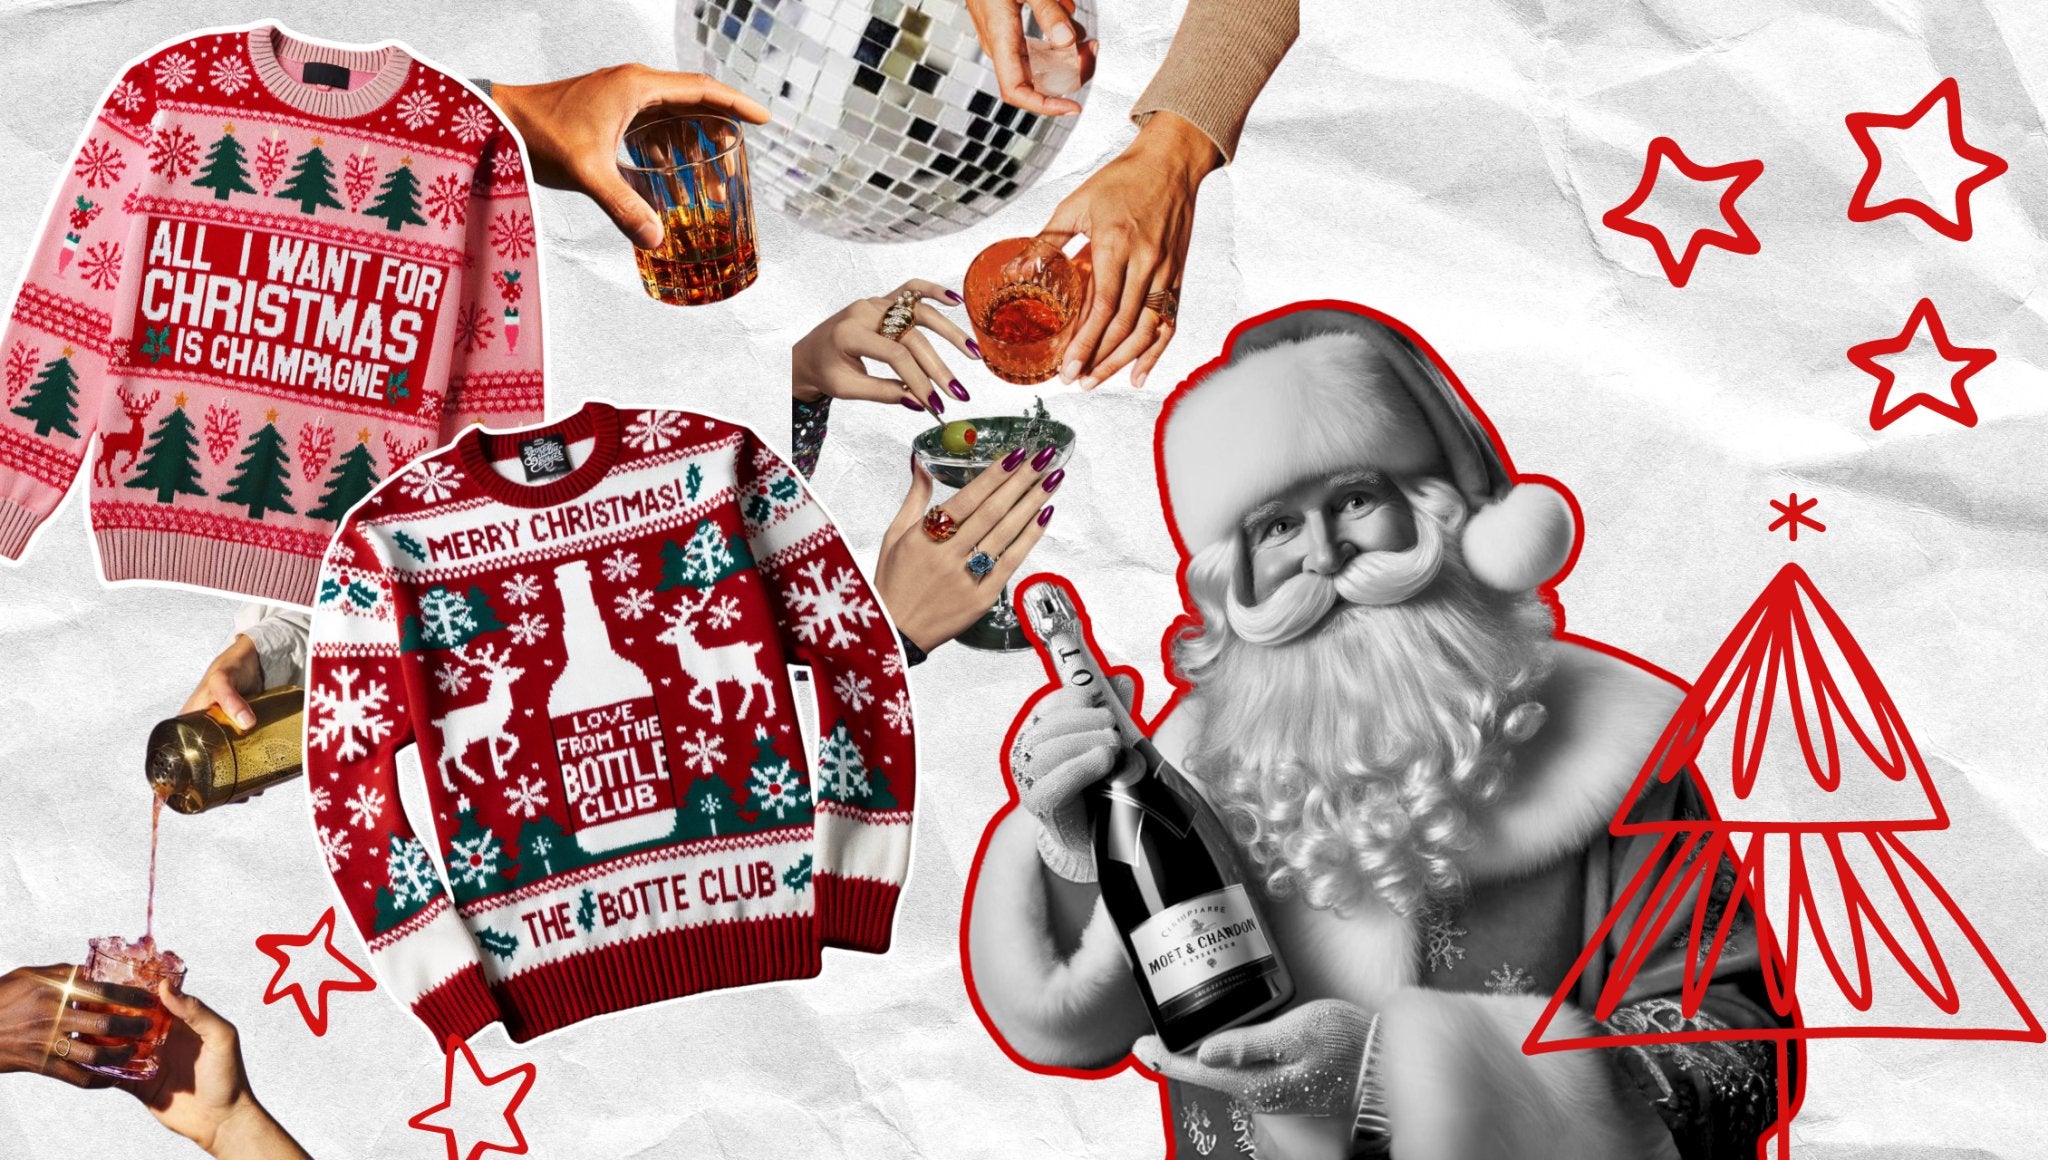 Your-Ultimate-Christmas-Day-Drink-Guide-From-Dawn-Til-Dusk The Bottle Club